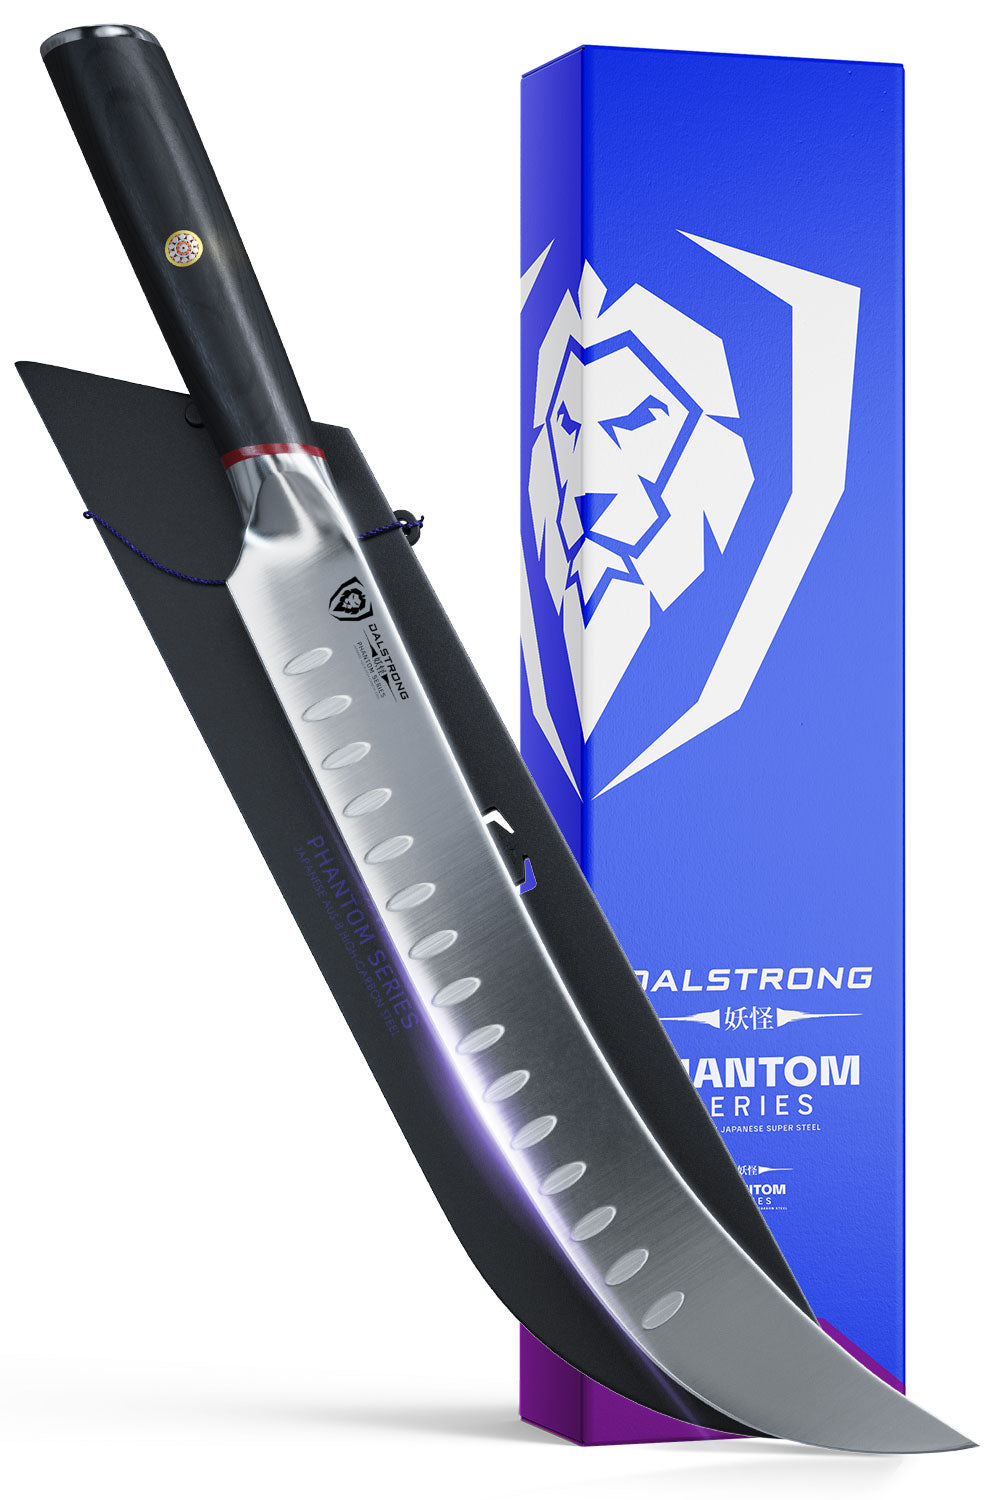 Dalstrong phantom series 10 inch butcher knife with pakka wood handle in front of it's premium packaging.